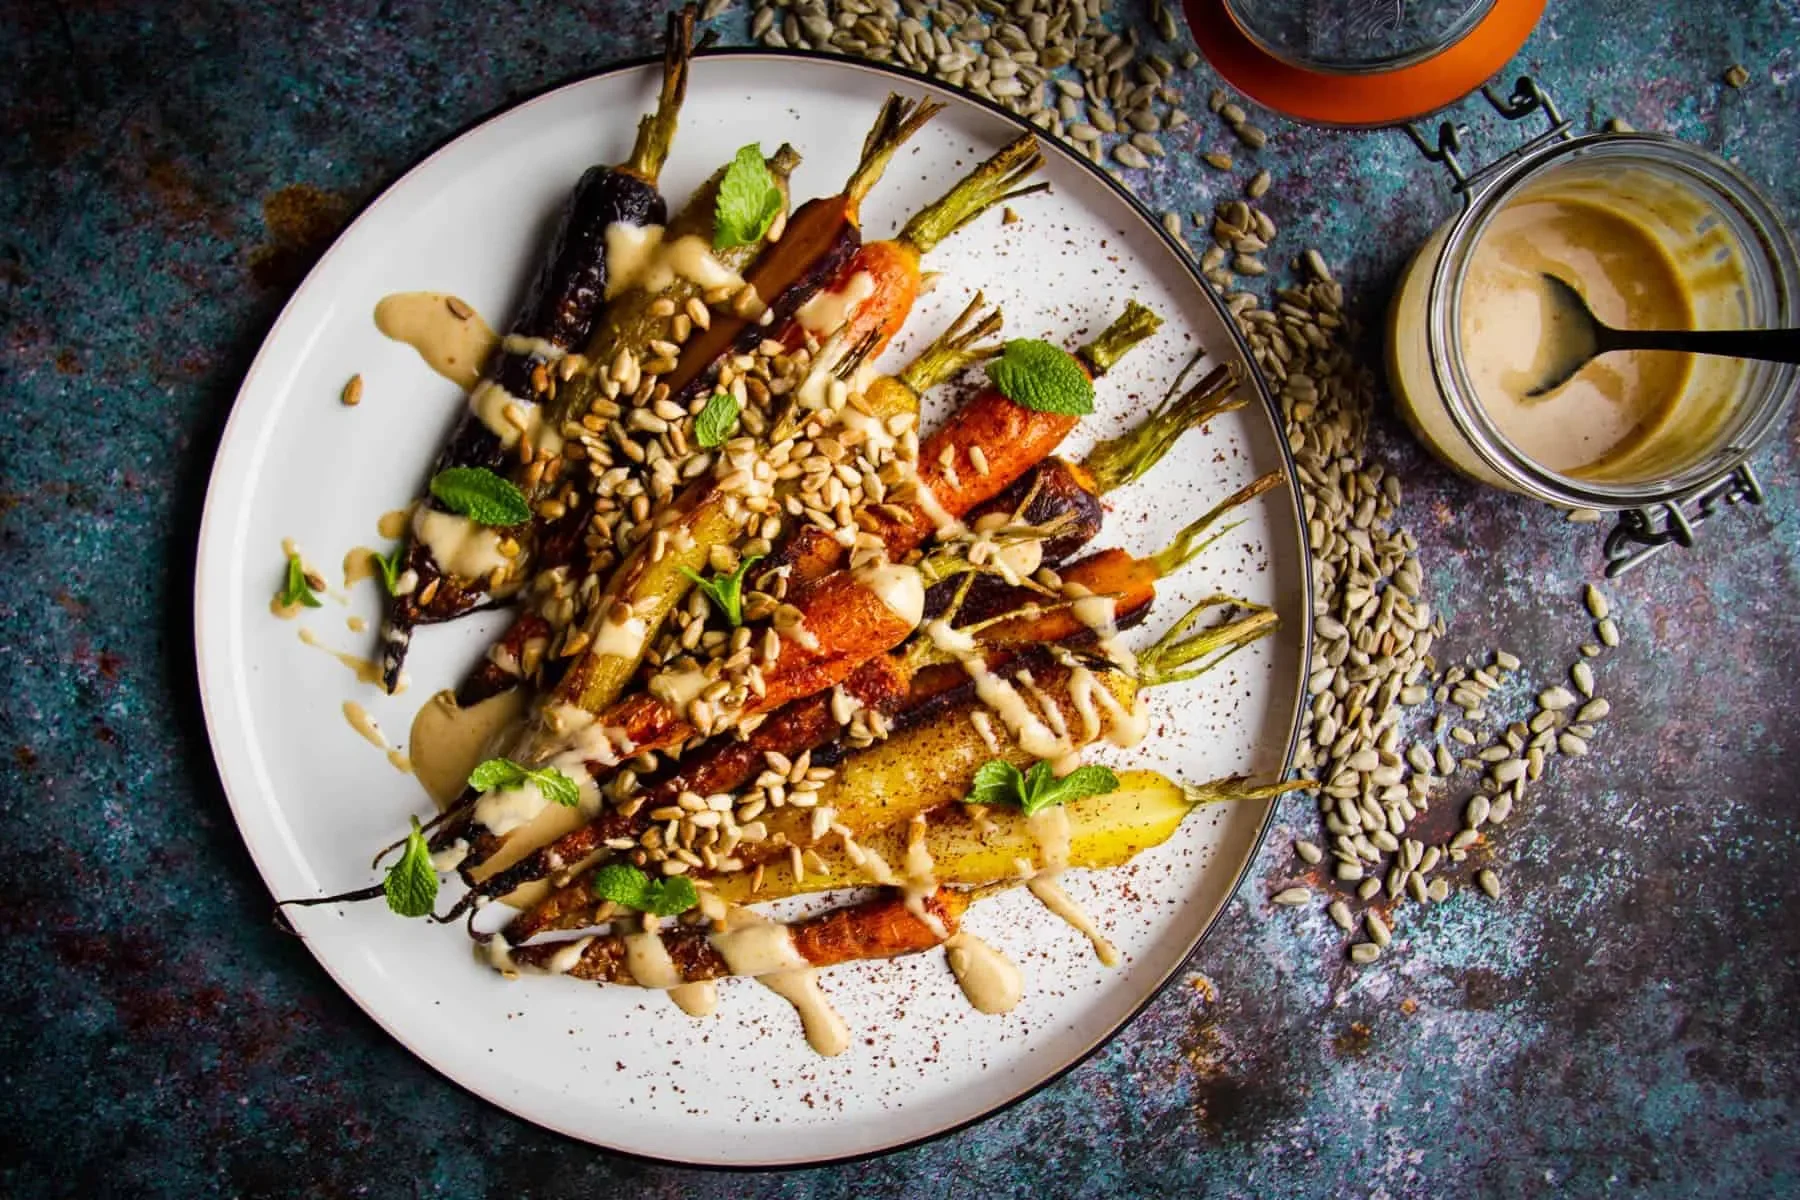 Sumac Roasted Carrots with Mint and Sunflower Dressing